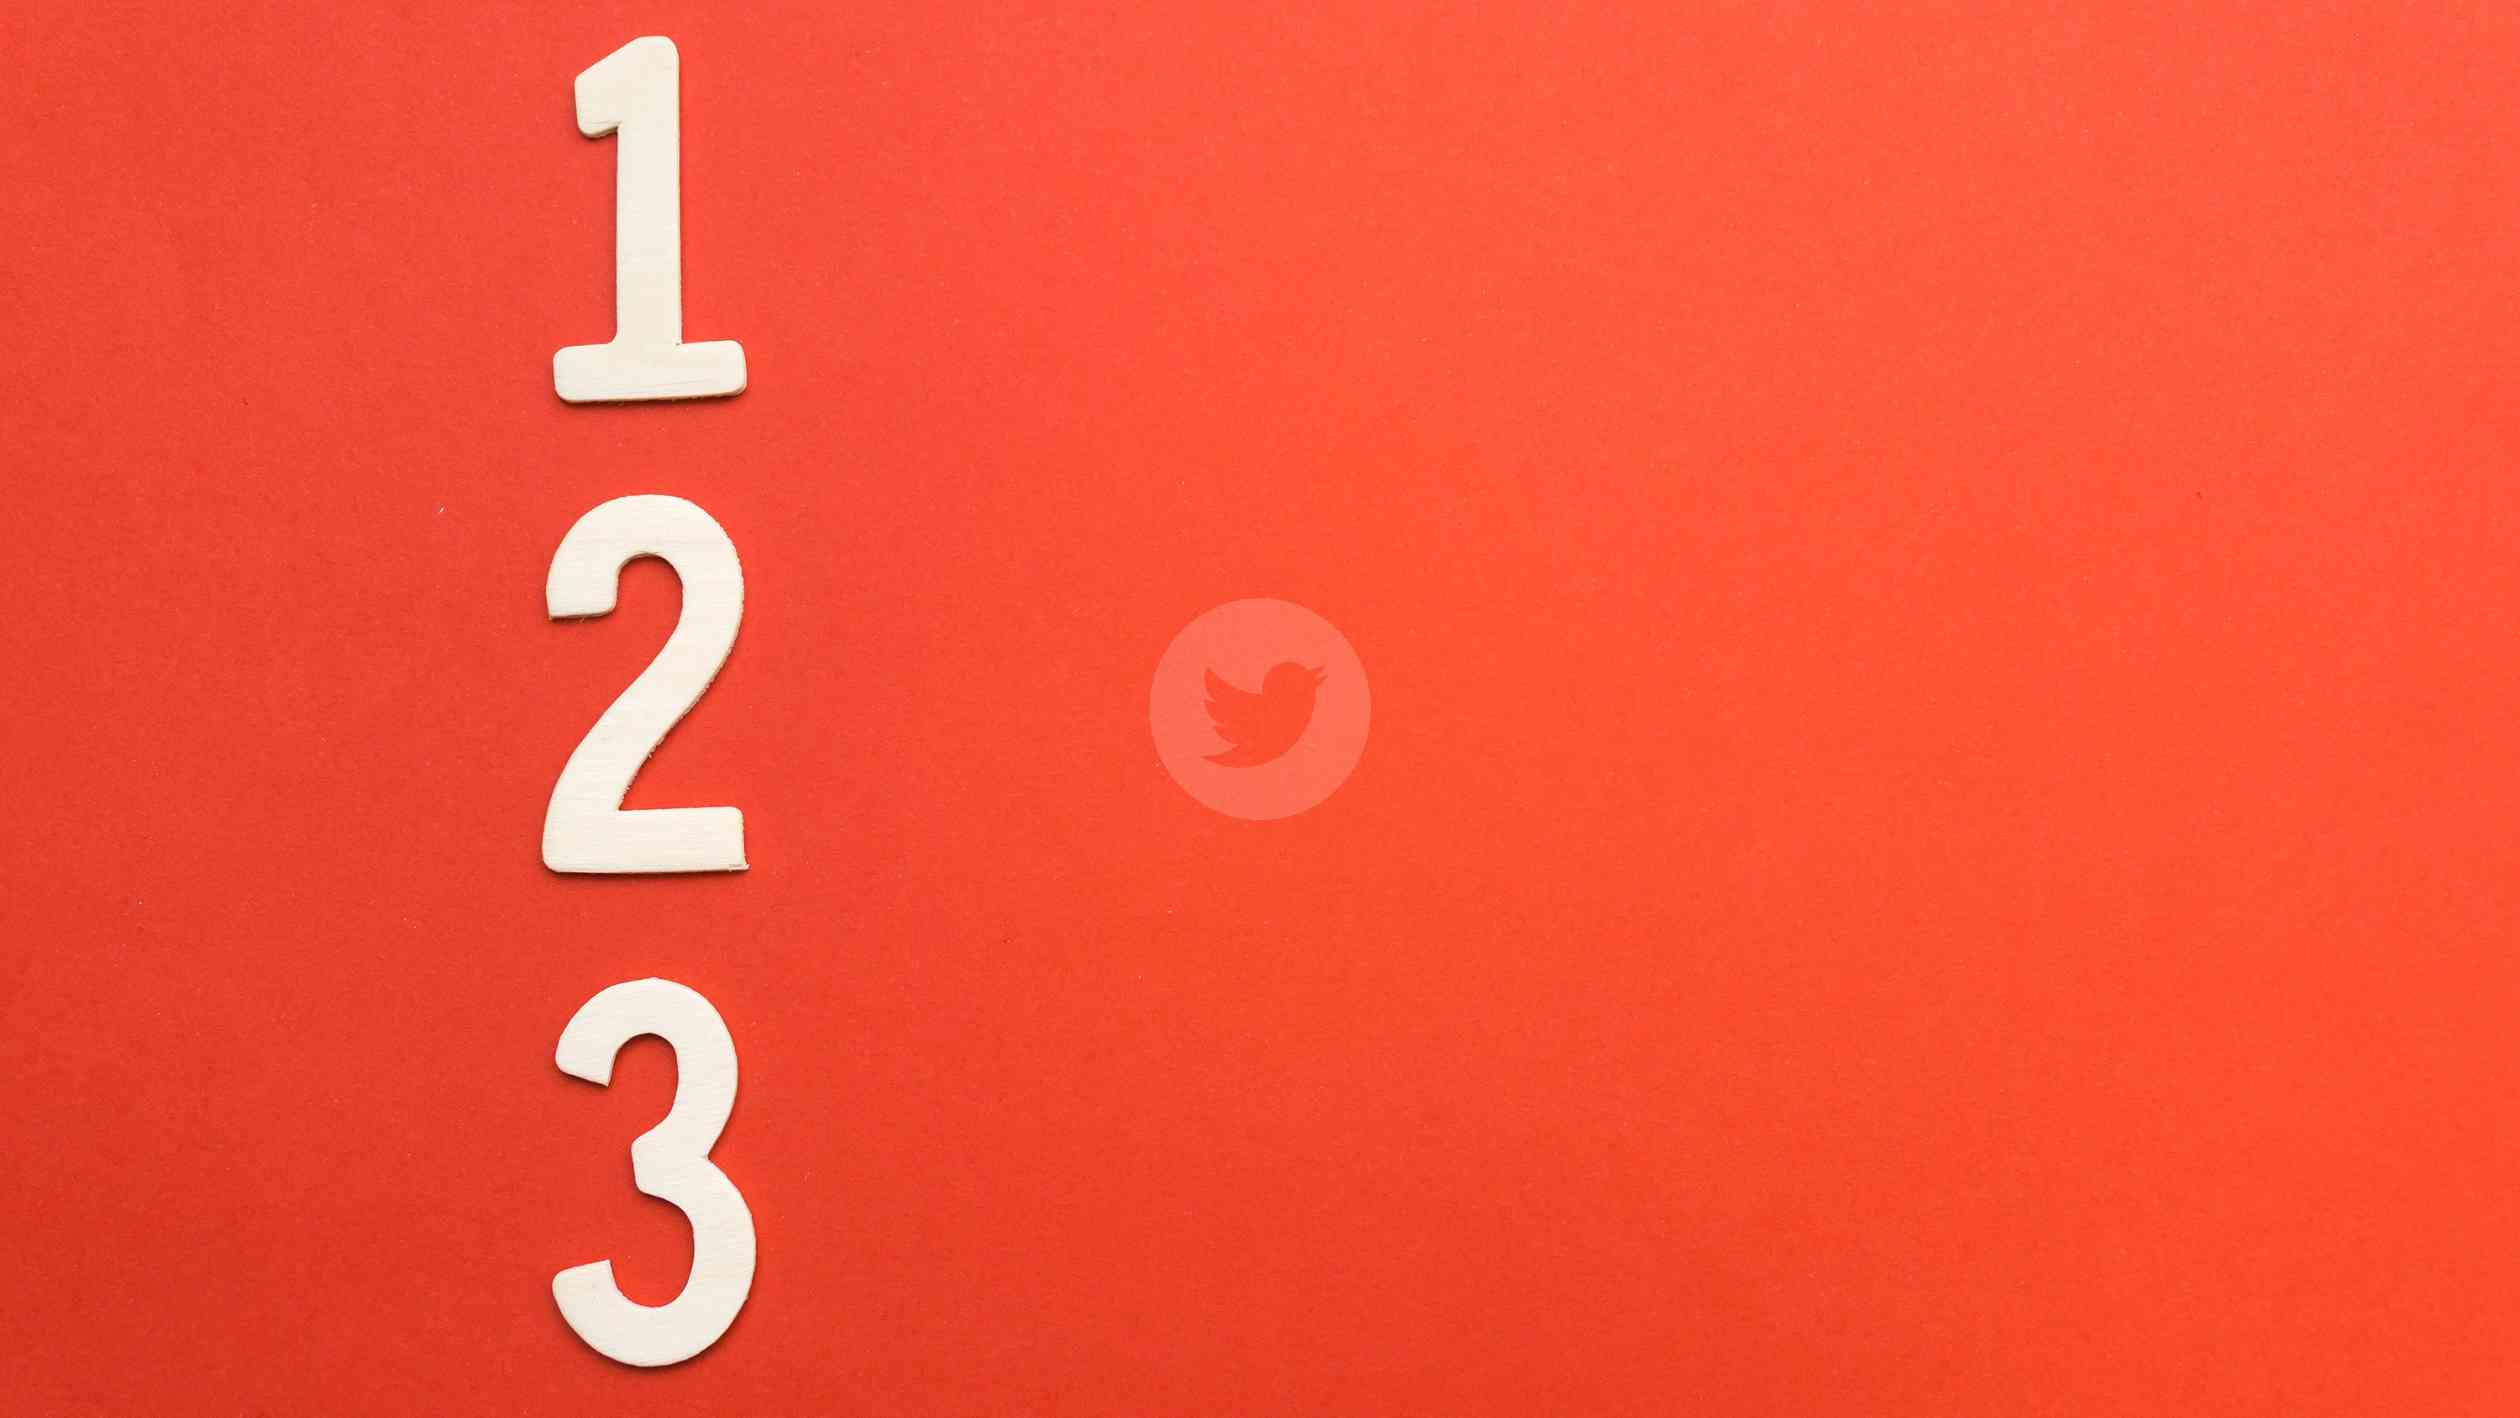 Learn to check your real time Twitter follower count!